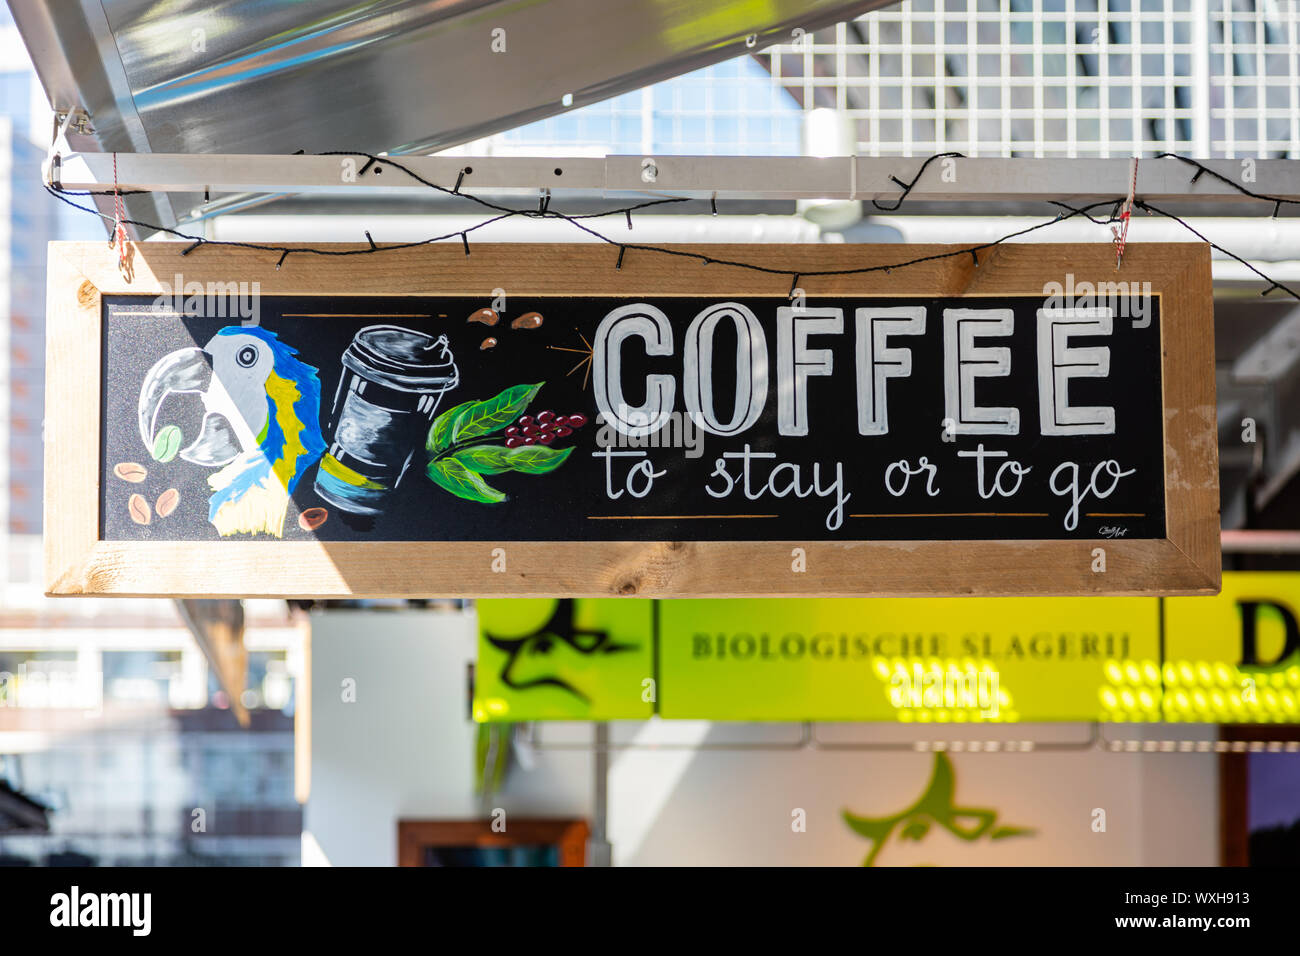 Rotterdam, Netherlands. June 28, 2019. Coffee to stay or to go. Hanging board advertise a coffee shop. Stock Photo